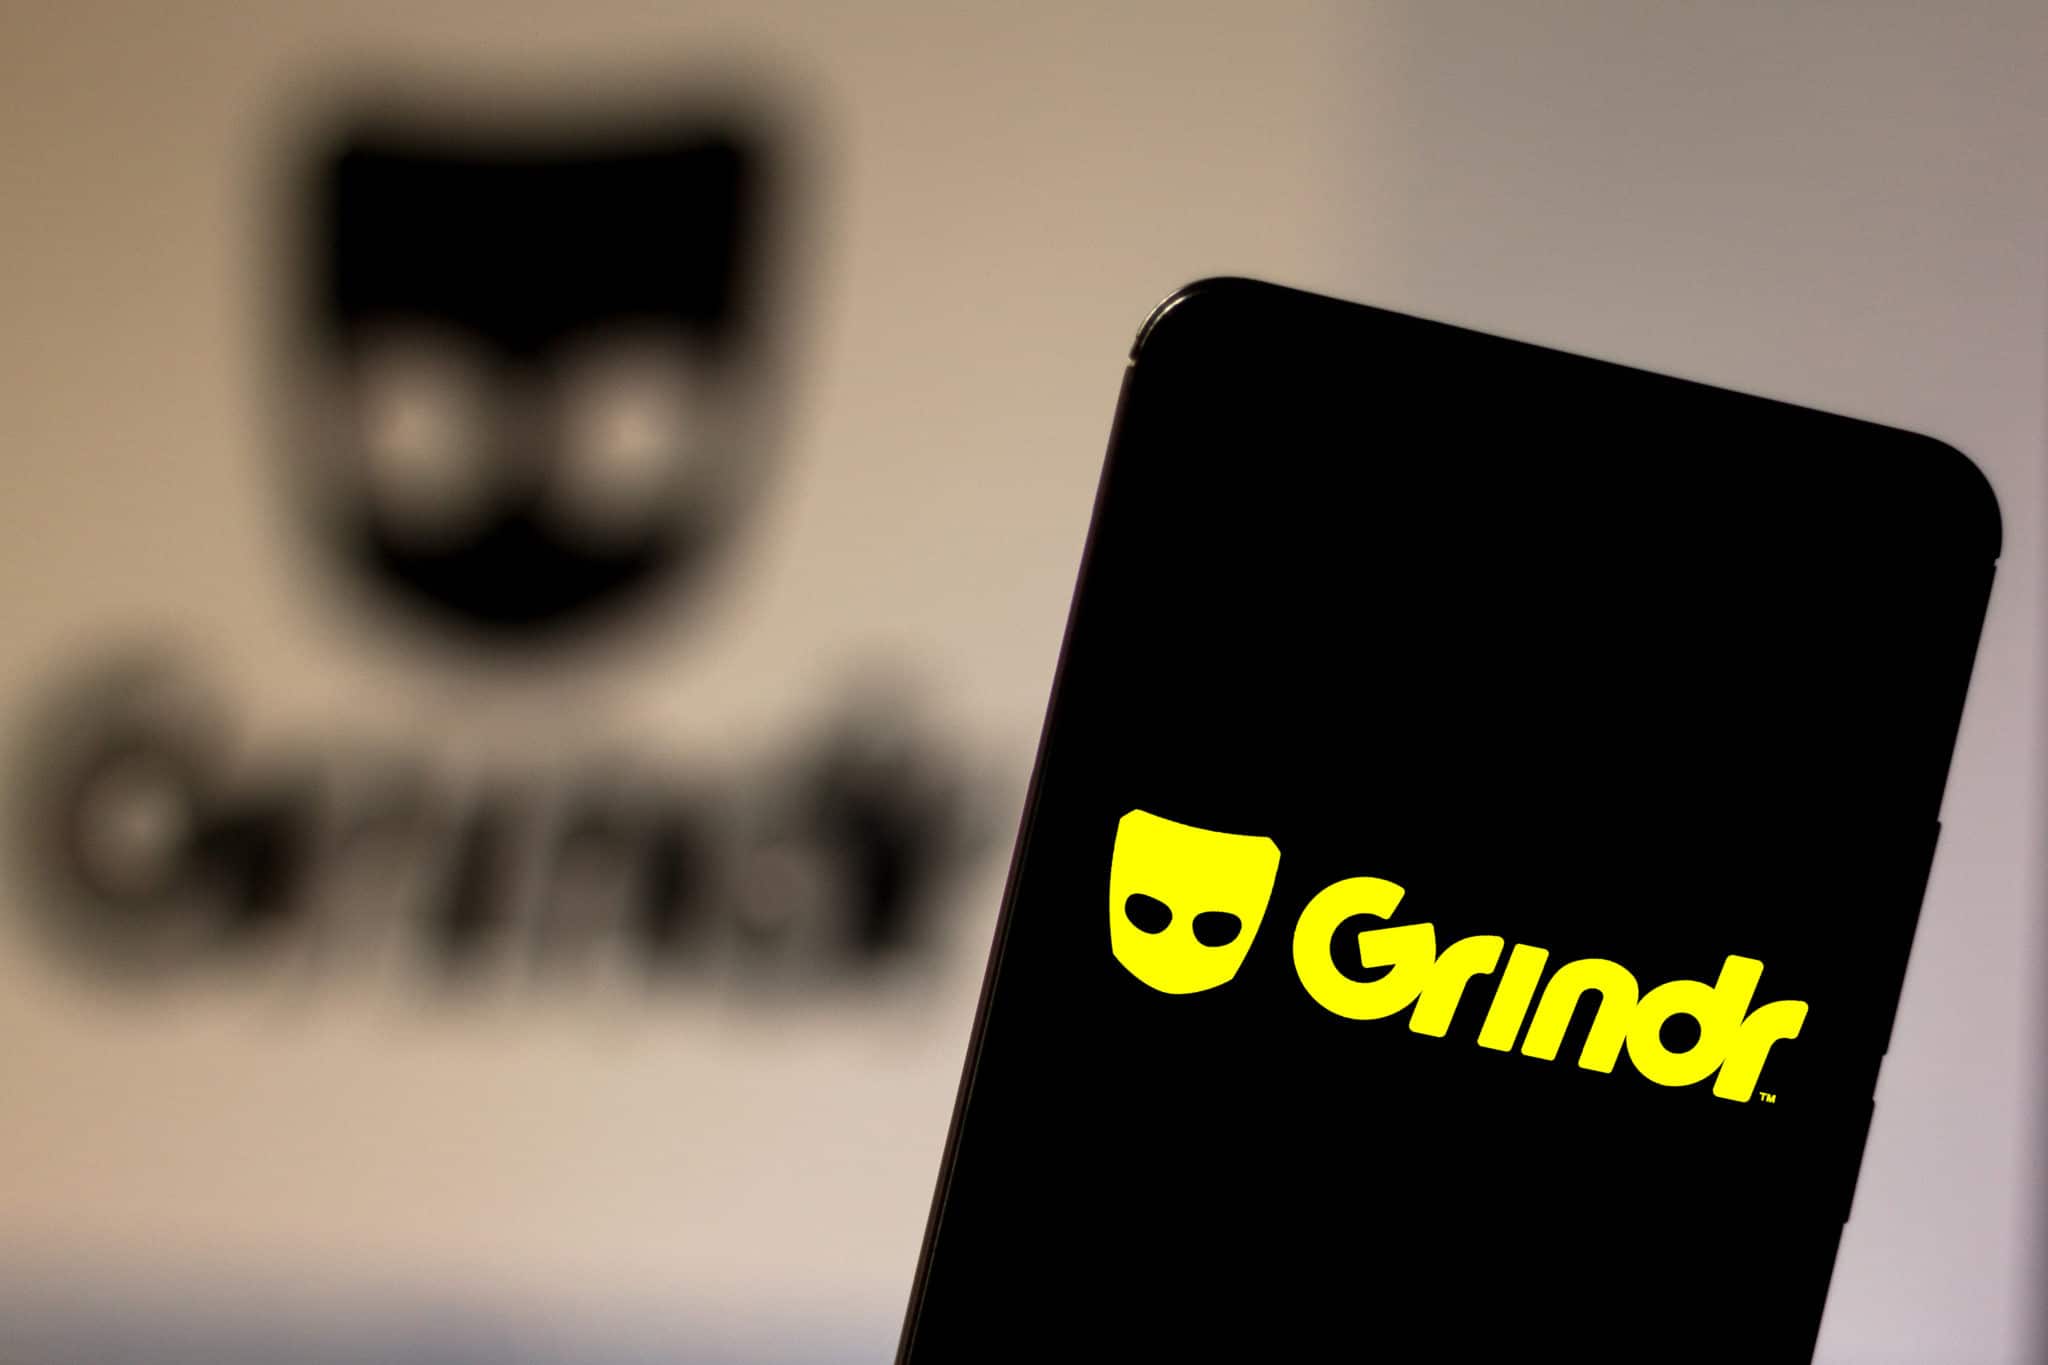 Chile is top of the tops, according to Grindr 